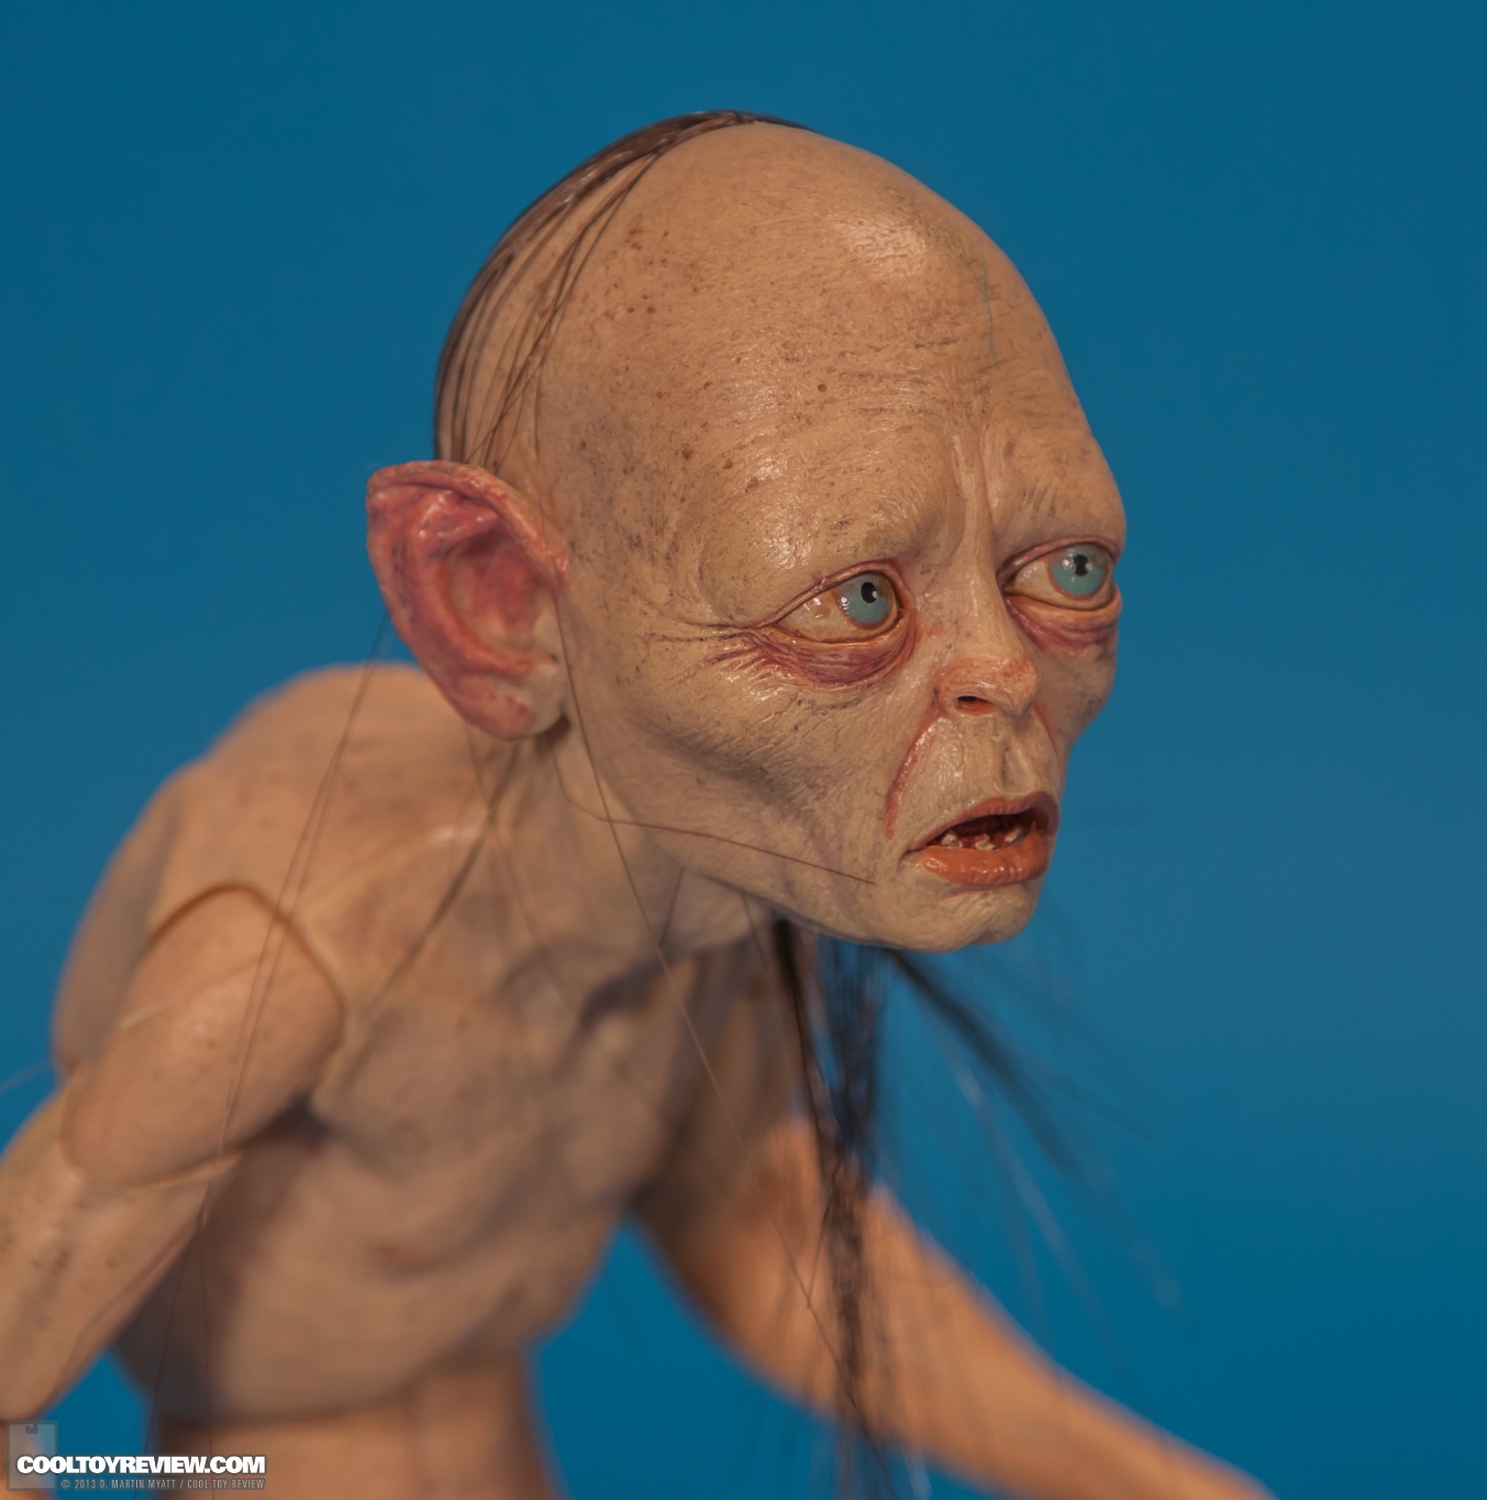 Smeagol_Lord_Of_The_Rings_NECA-010.jpg